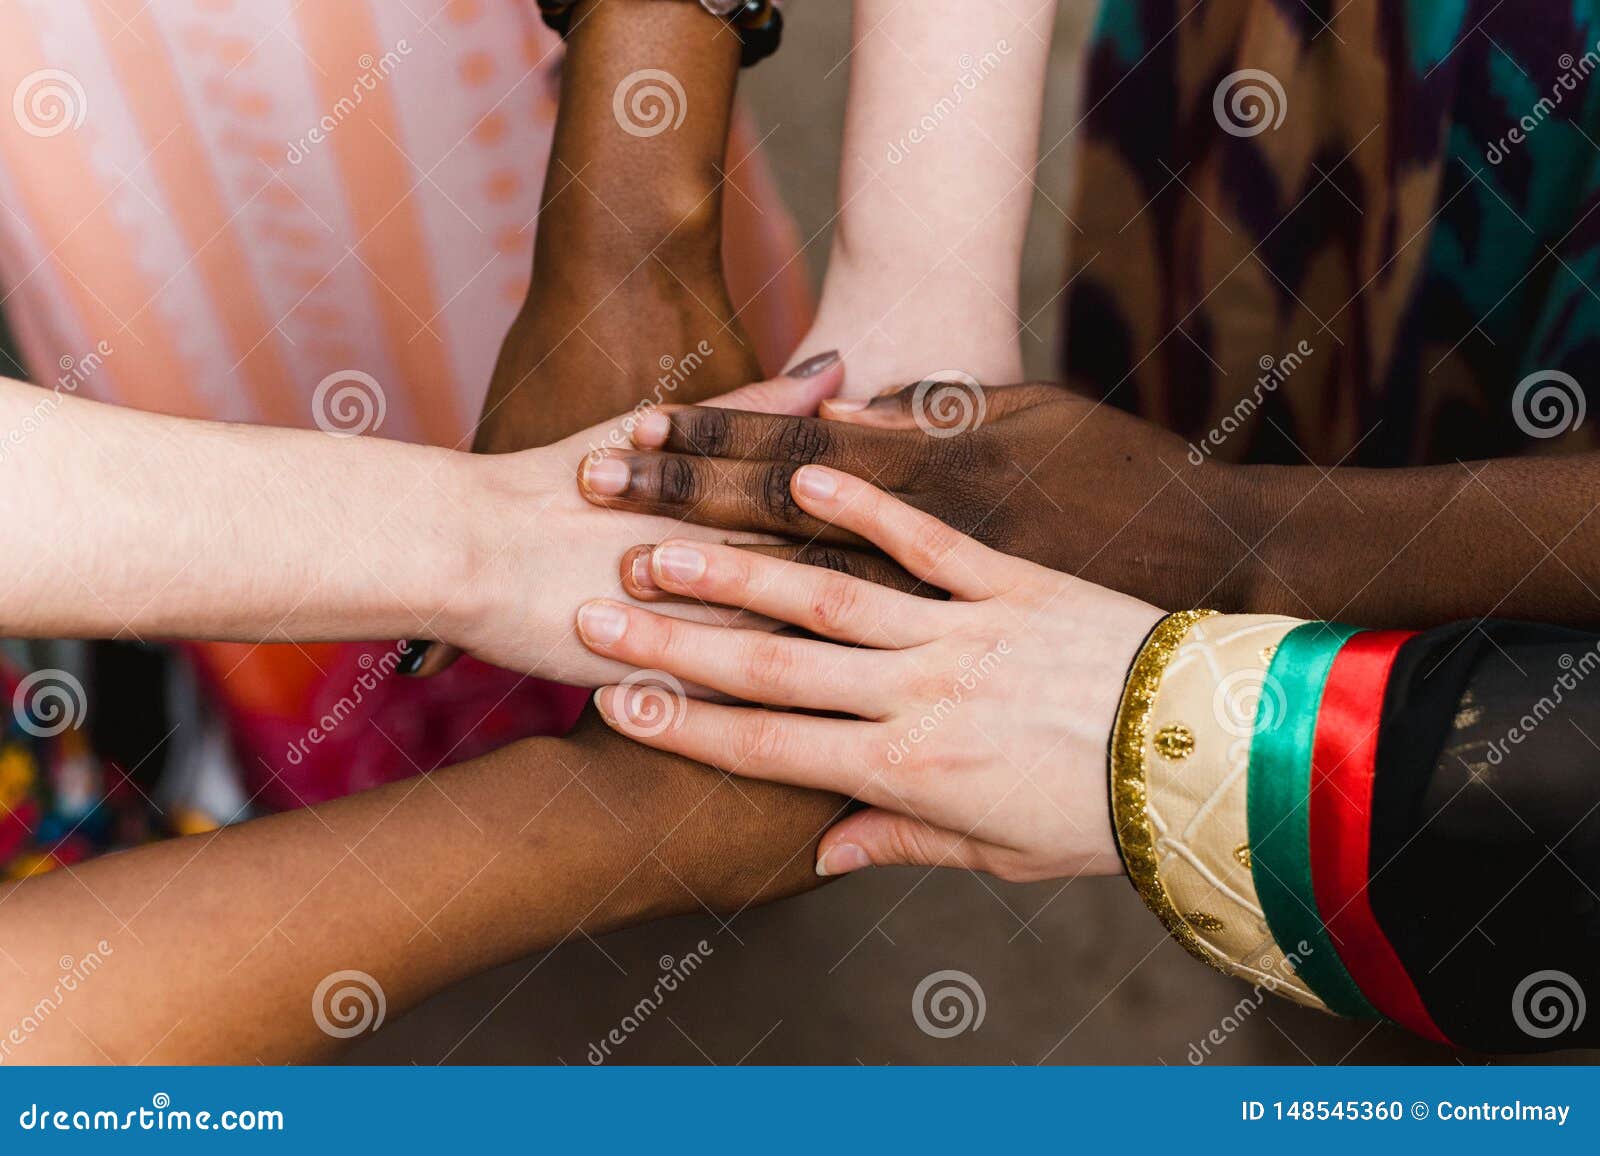 national diversity. people of different appearance and nationality stand in a circle together and hold hands. team building and pa